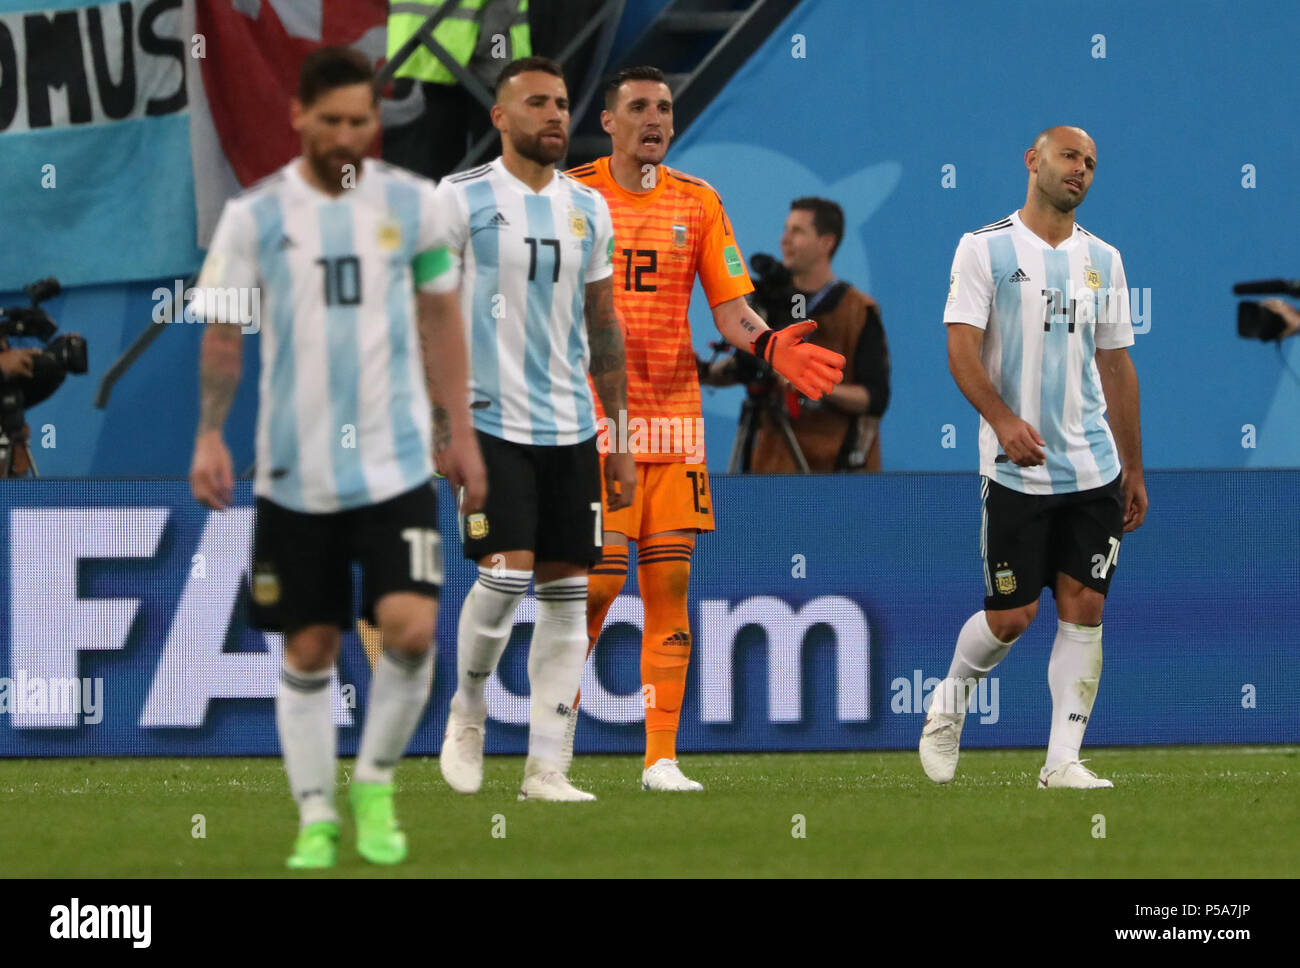 26 June 2018, Russia, Moscow: Soccer, World Cup 2018, Preliminary round, Group D, 3rd game day, Nigeria vs Argentina at the St. Petersburg Stadium: Argentina's goalkeeper Franco Armani (2-R) and Argentina's Javier Mascherano react to Nigeria's 1-1 goal. Photo: Cezaro De Luca/dpa Stock Photo